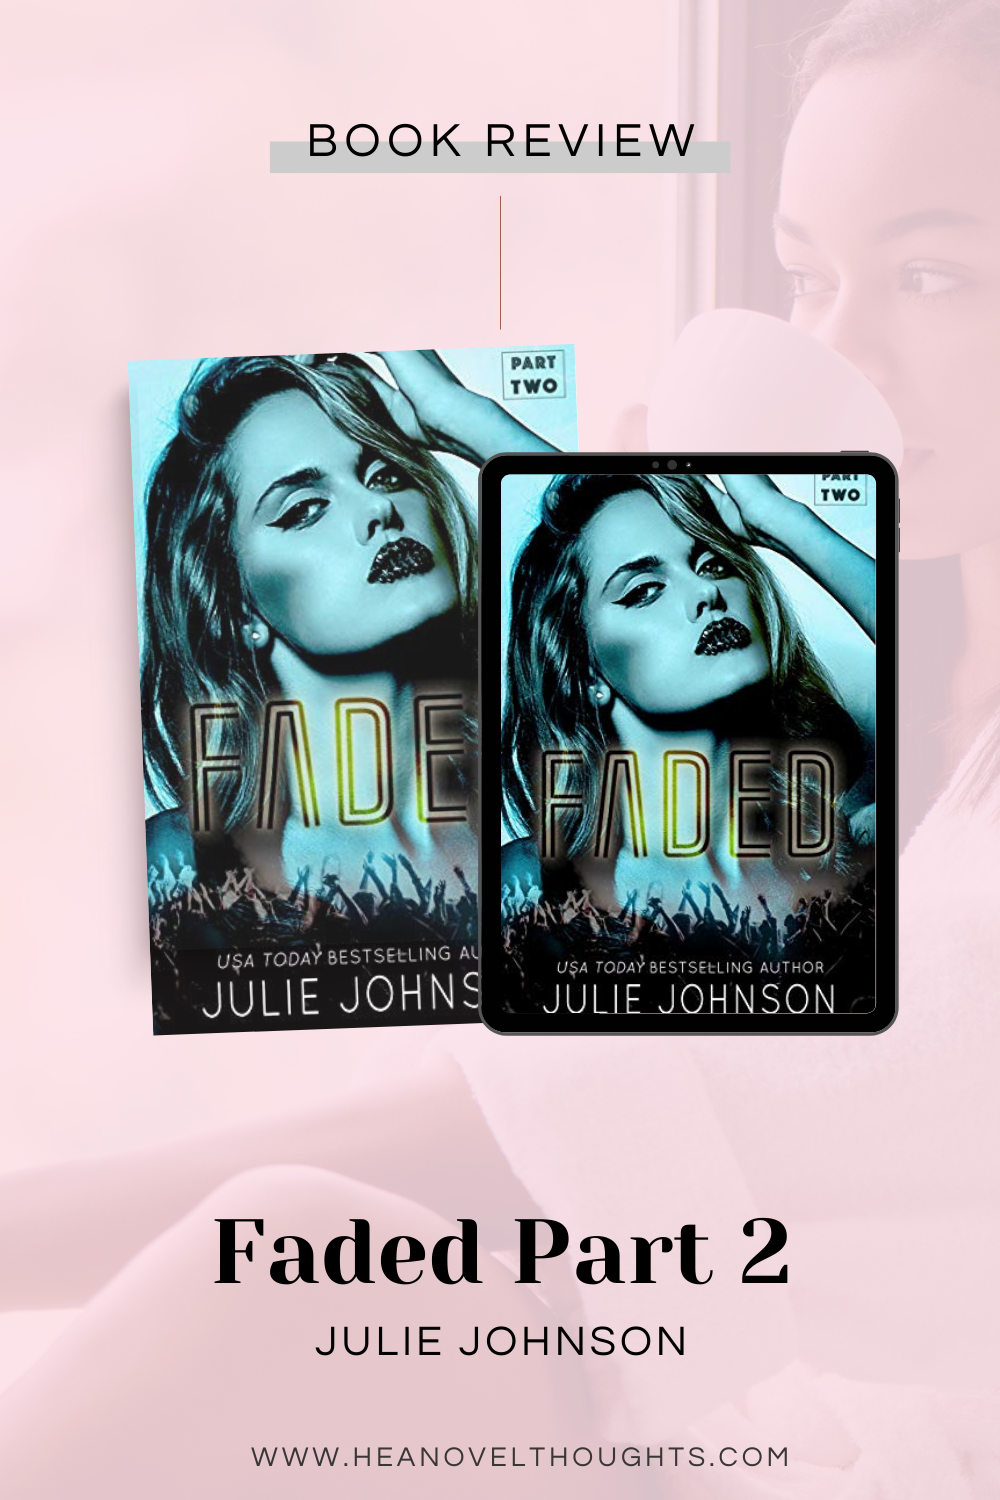 Faded Part 2 by Julie Johnson